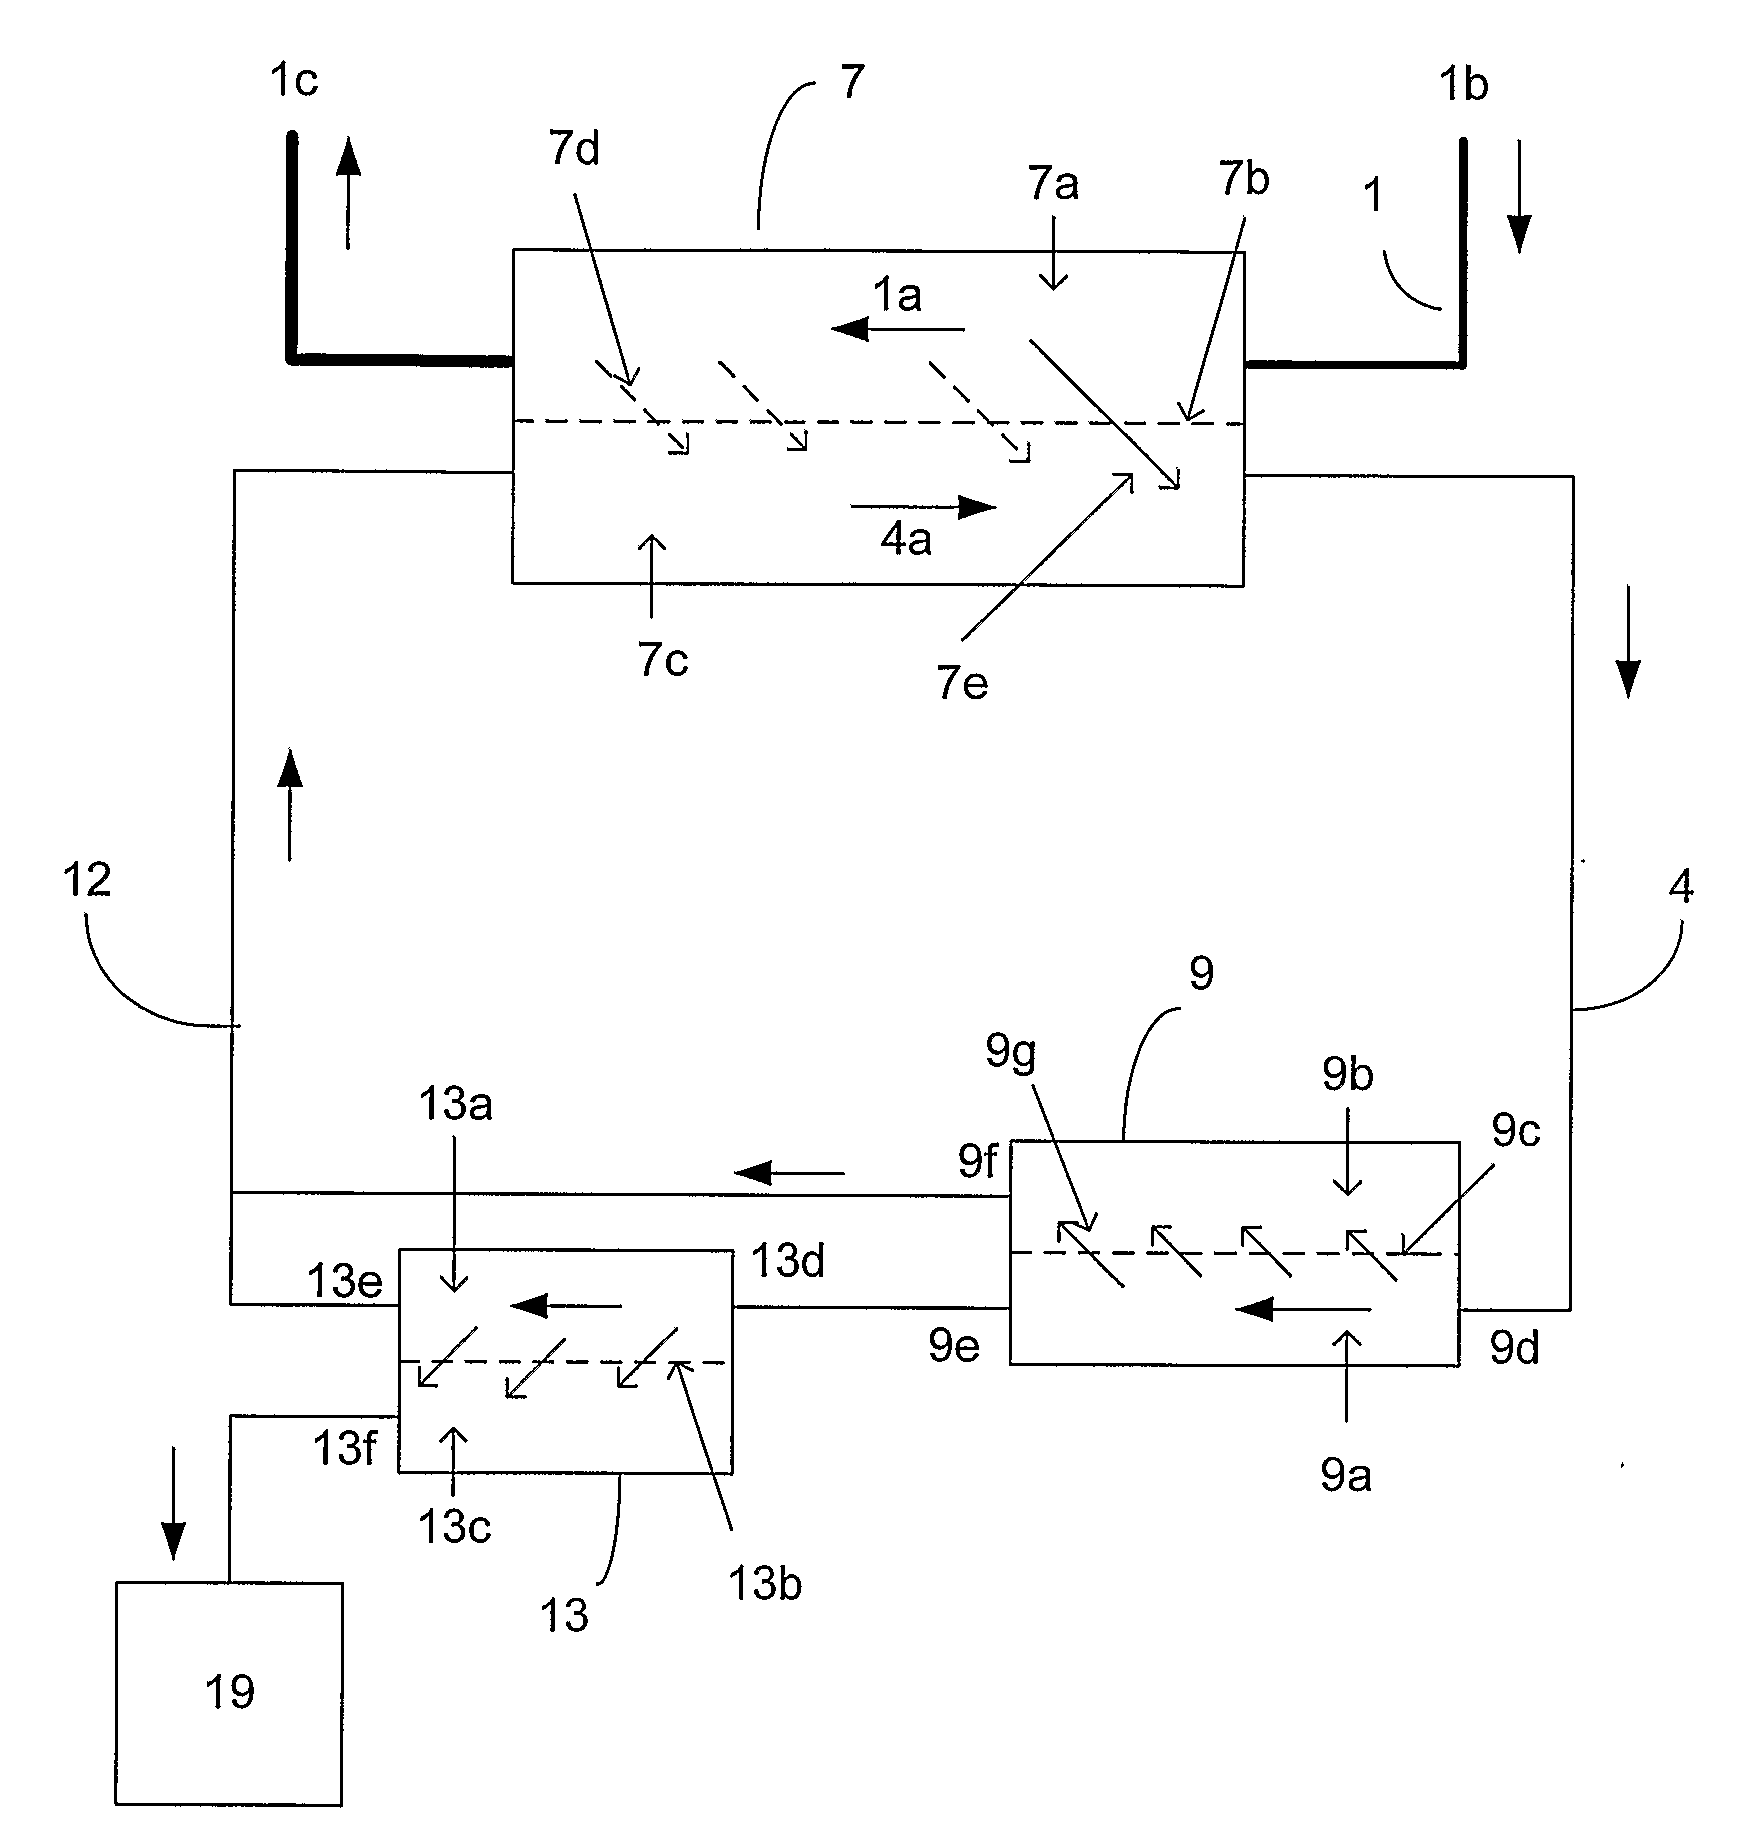 System and Method for Regeneration of a Fluid